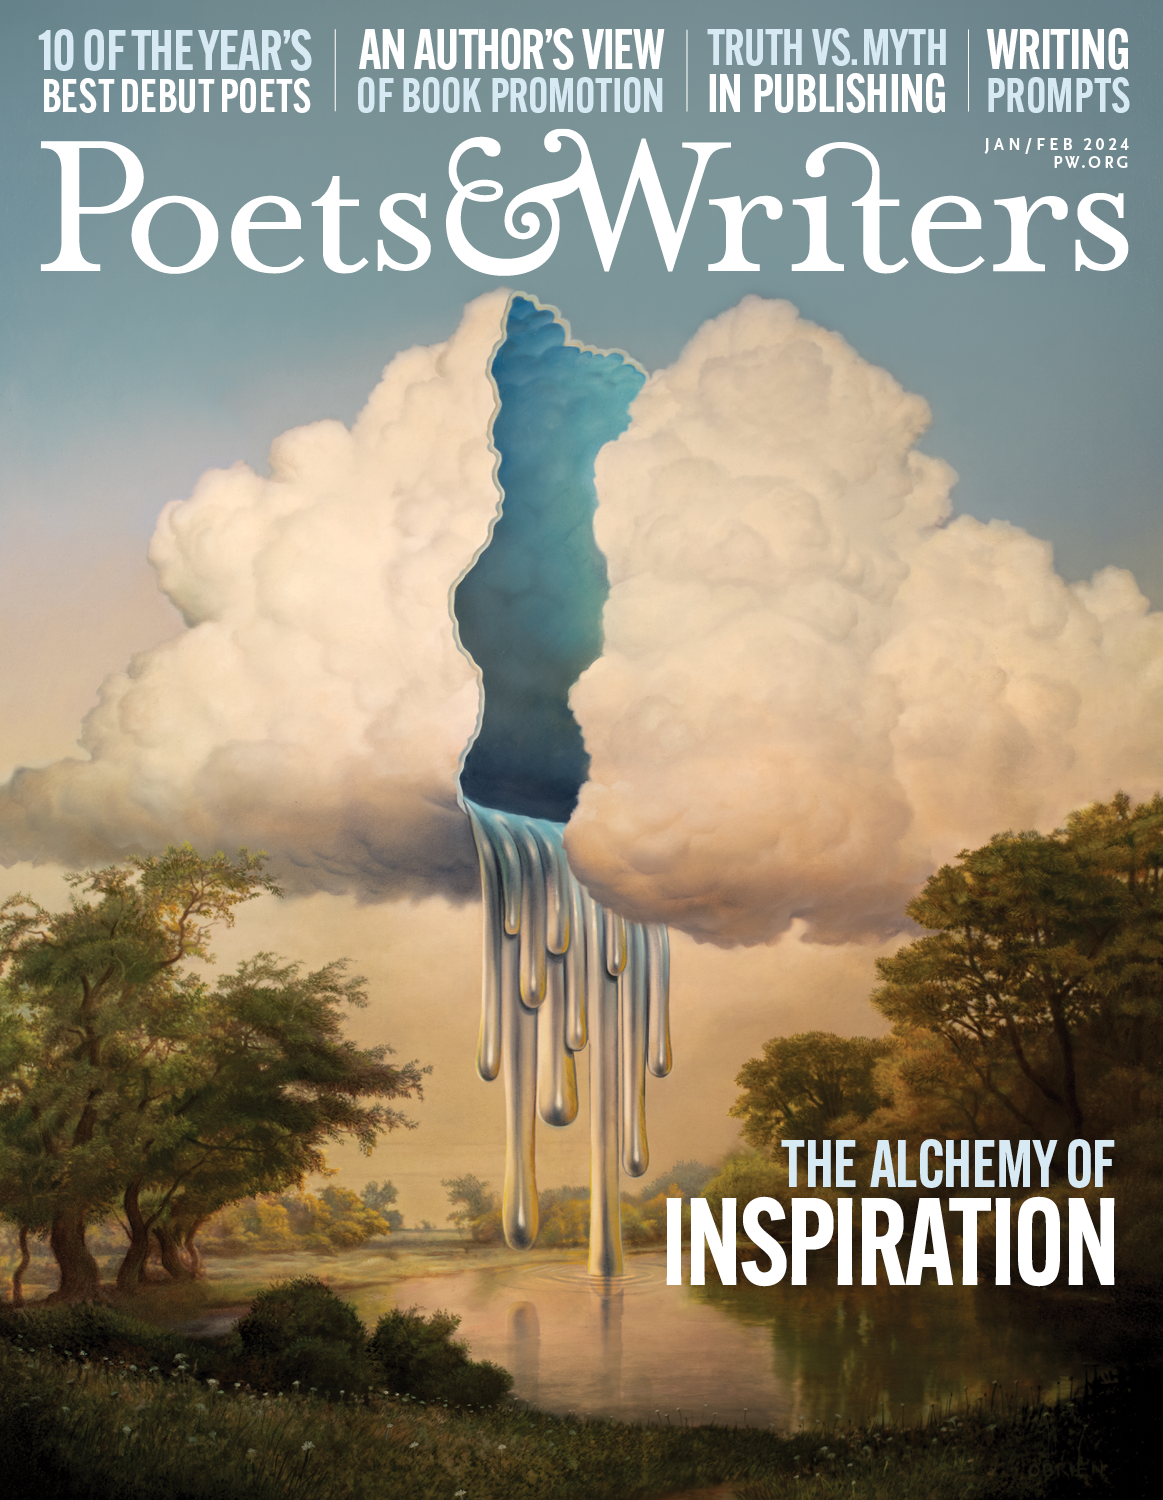 The cover of Poets and Writers Magazine's January/February issue, which features a cloud cracked open over an idyllic landscape.